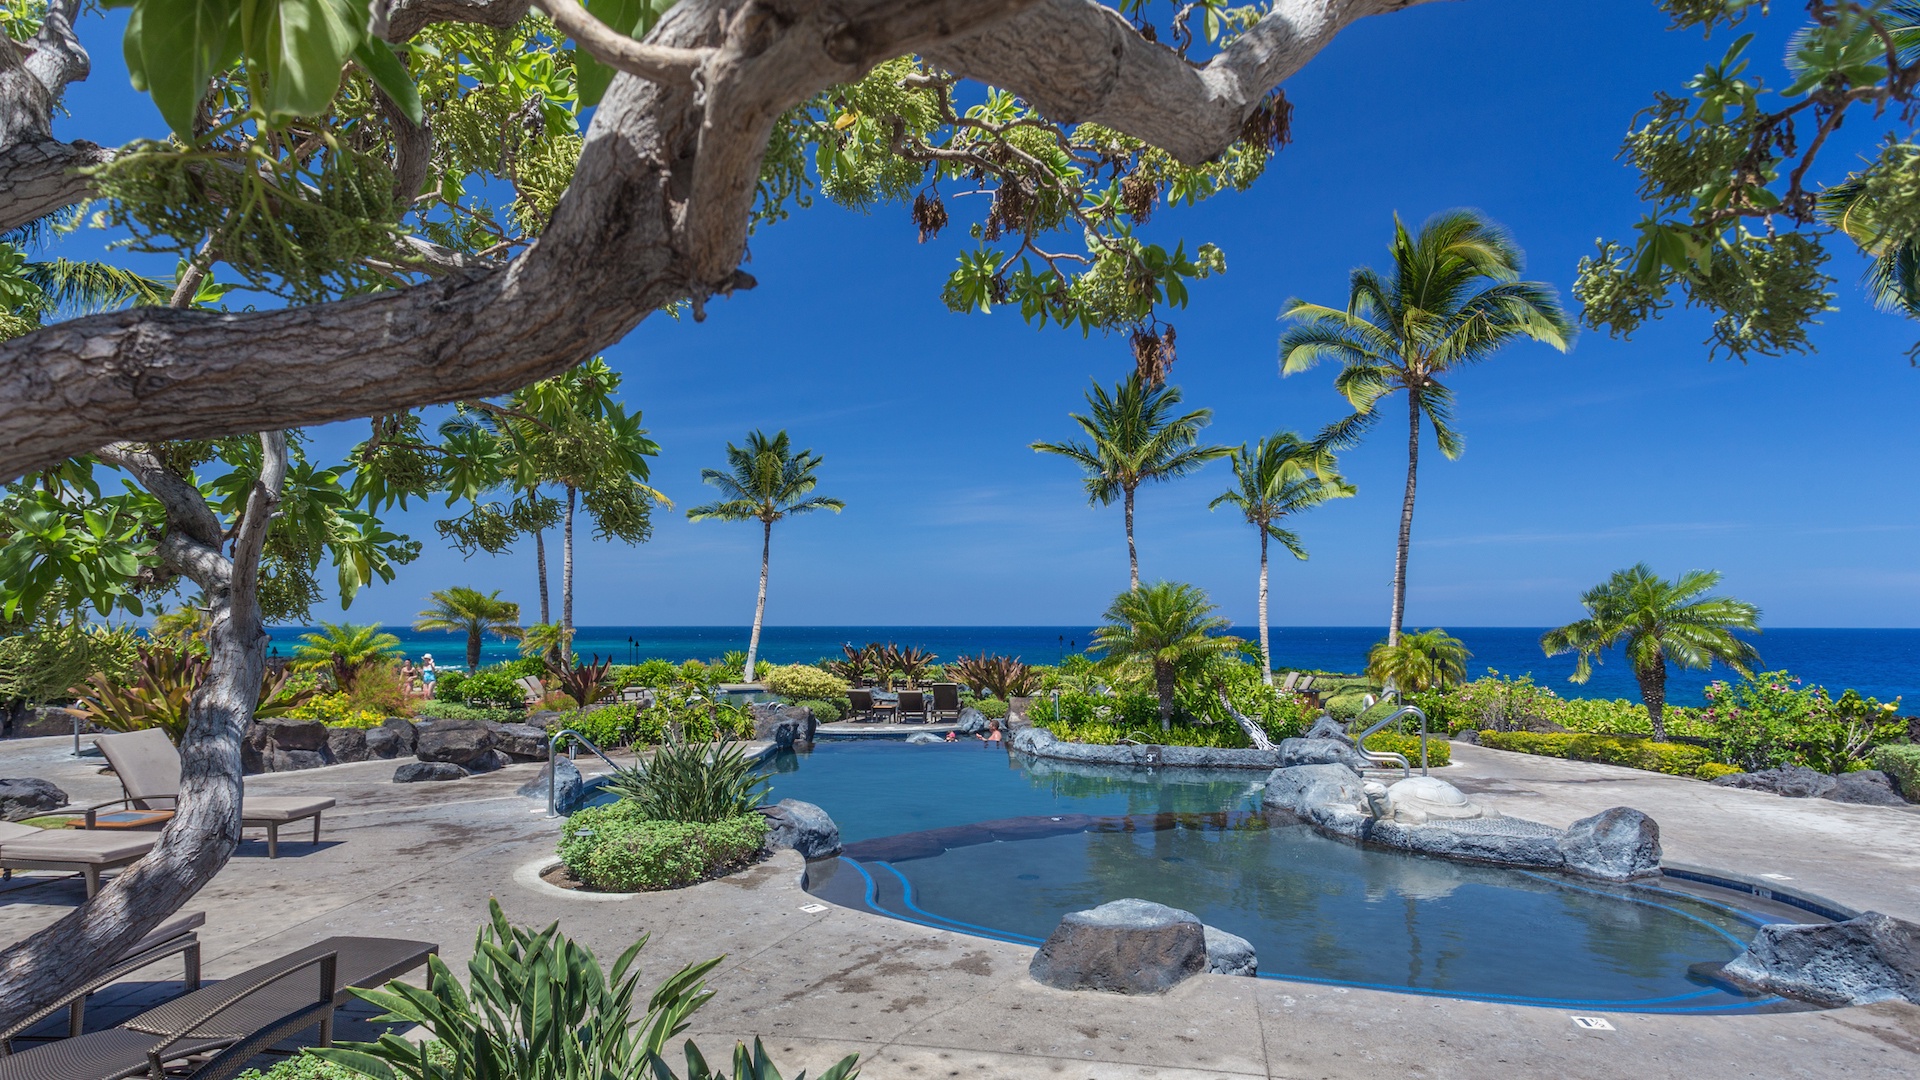 Waikoloa Vacation Rentals, 3BD Hali'i Kai (12G) at Waikoloa Resort - Hali'i Kai Resort's private lagoon-style saltwater pool, oceanfront.